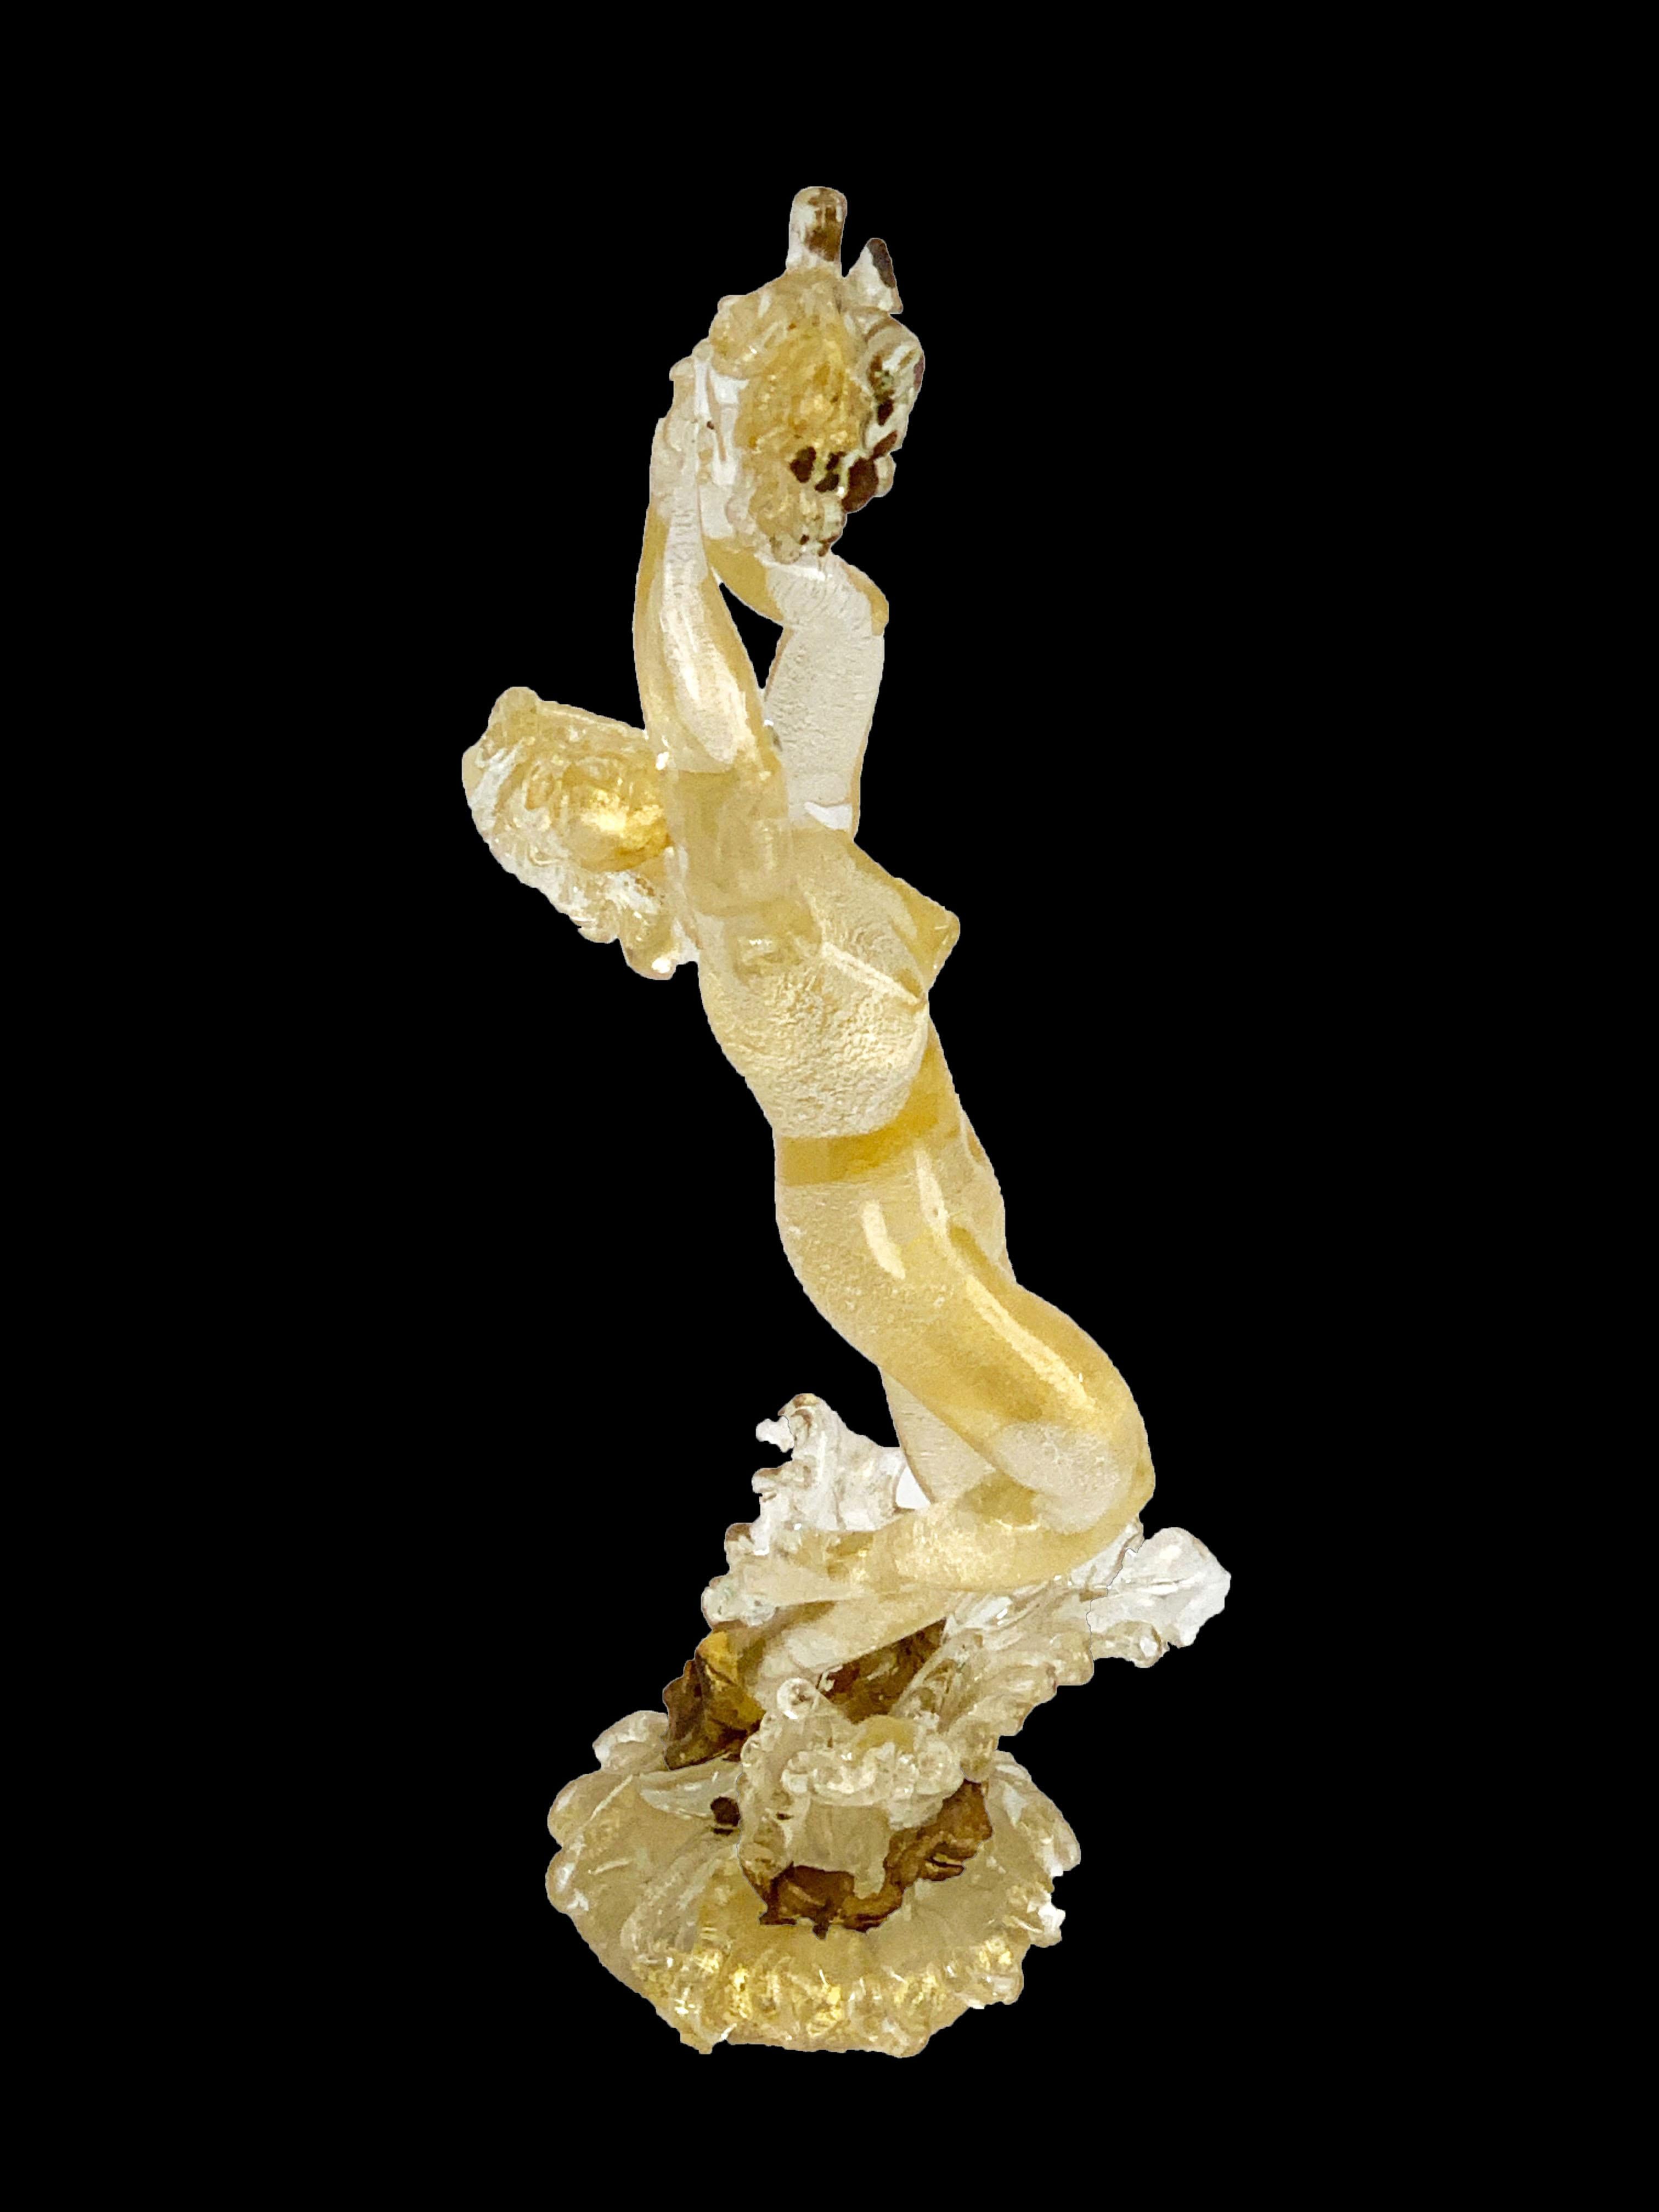 Amazing Murano glass statue depicting a naked woman.

This piece is a midcentury masterpiece produced in Italy during the 1950s and attributed to the master designer Ercole Barovier.

A wonderful piece that, through the materials, reflect the